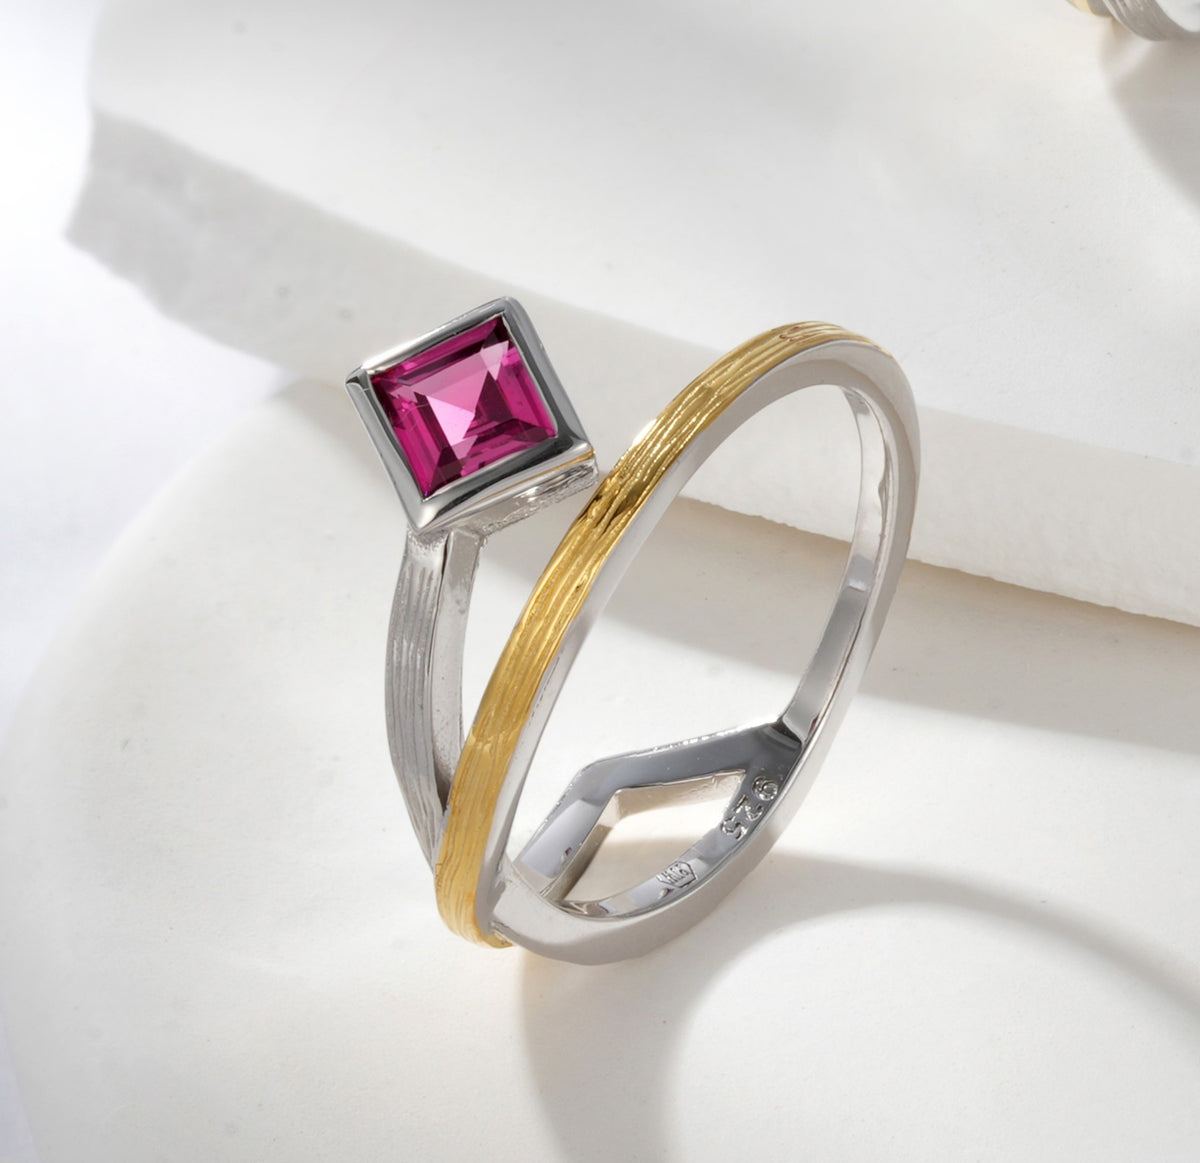 A gold and silver ring with a rodolite stone.